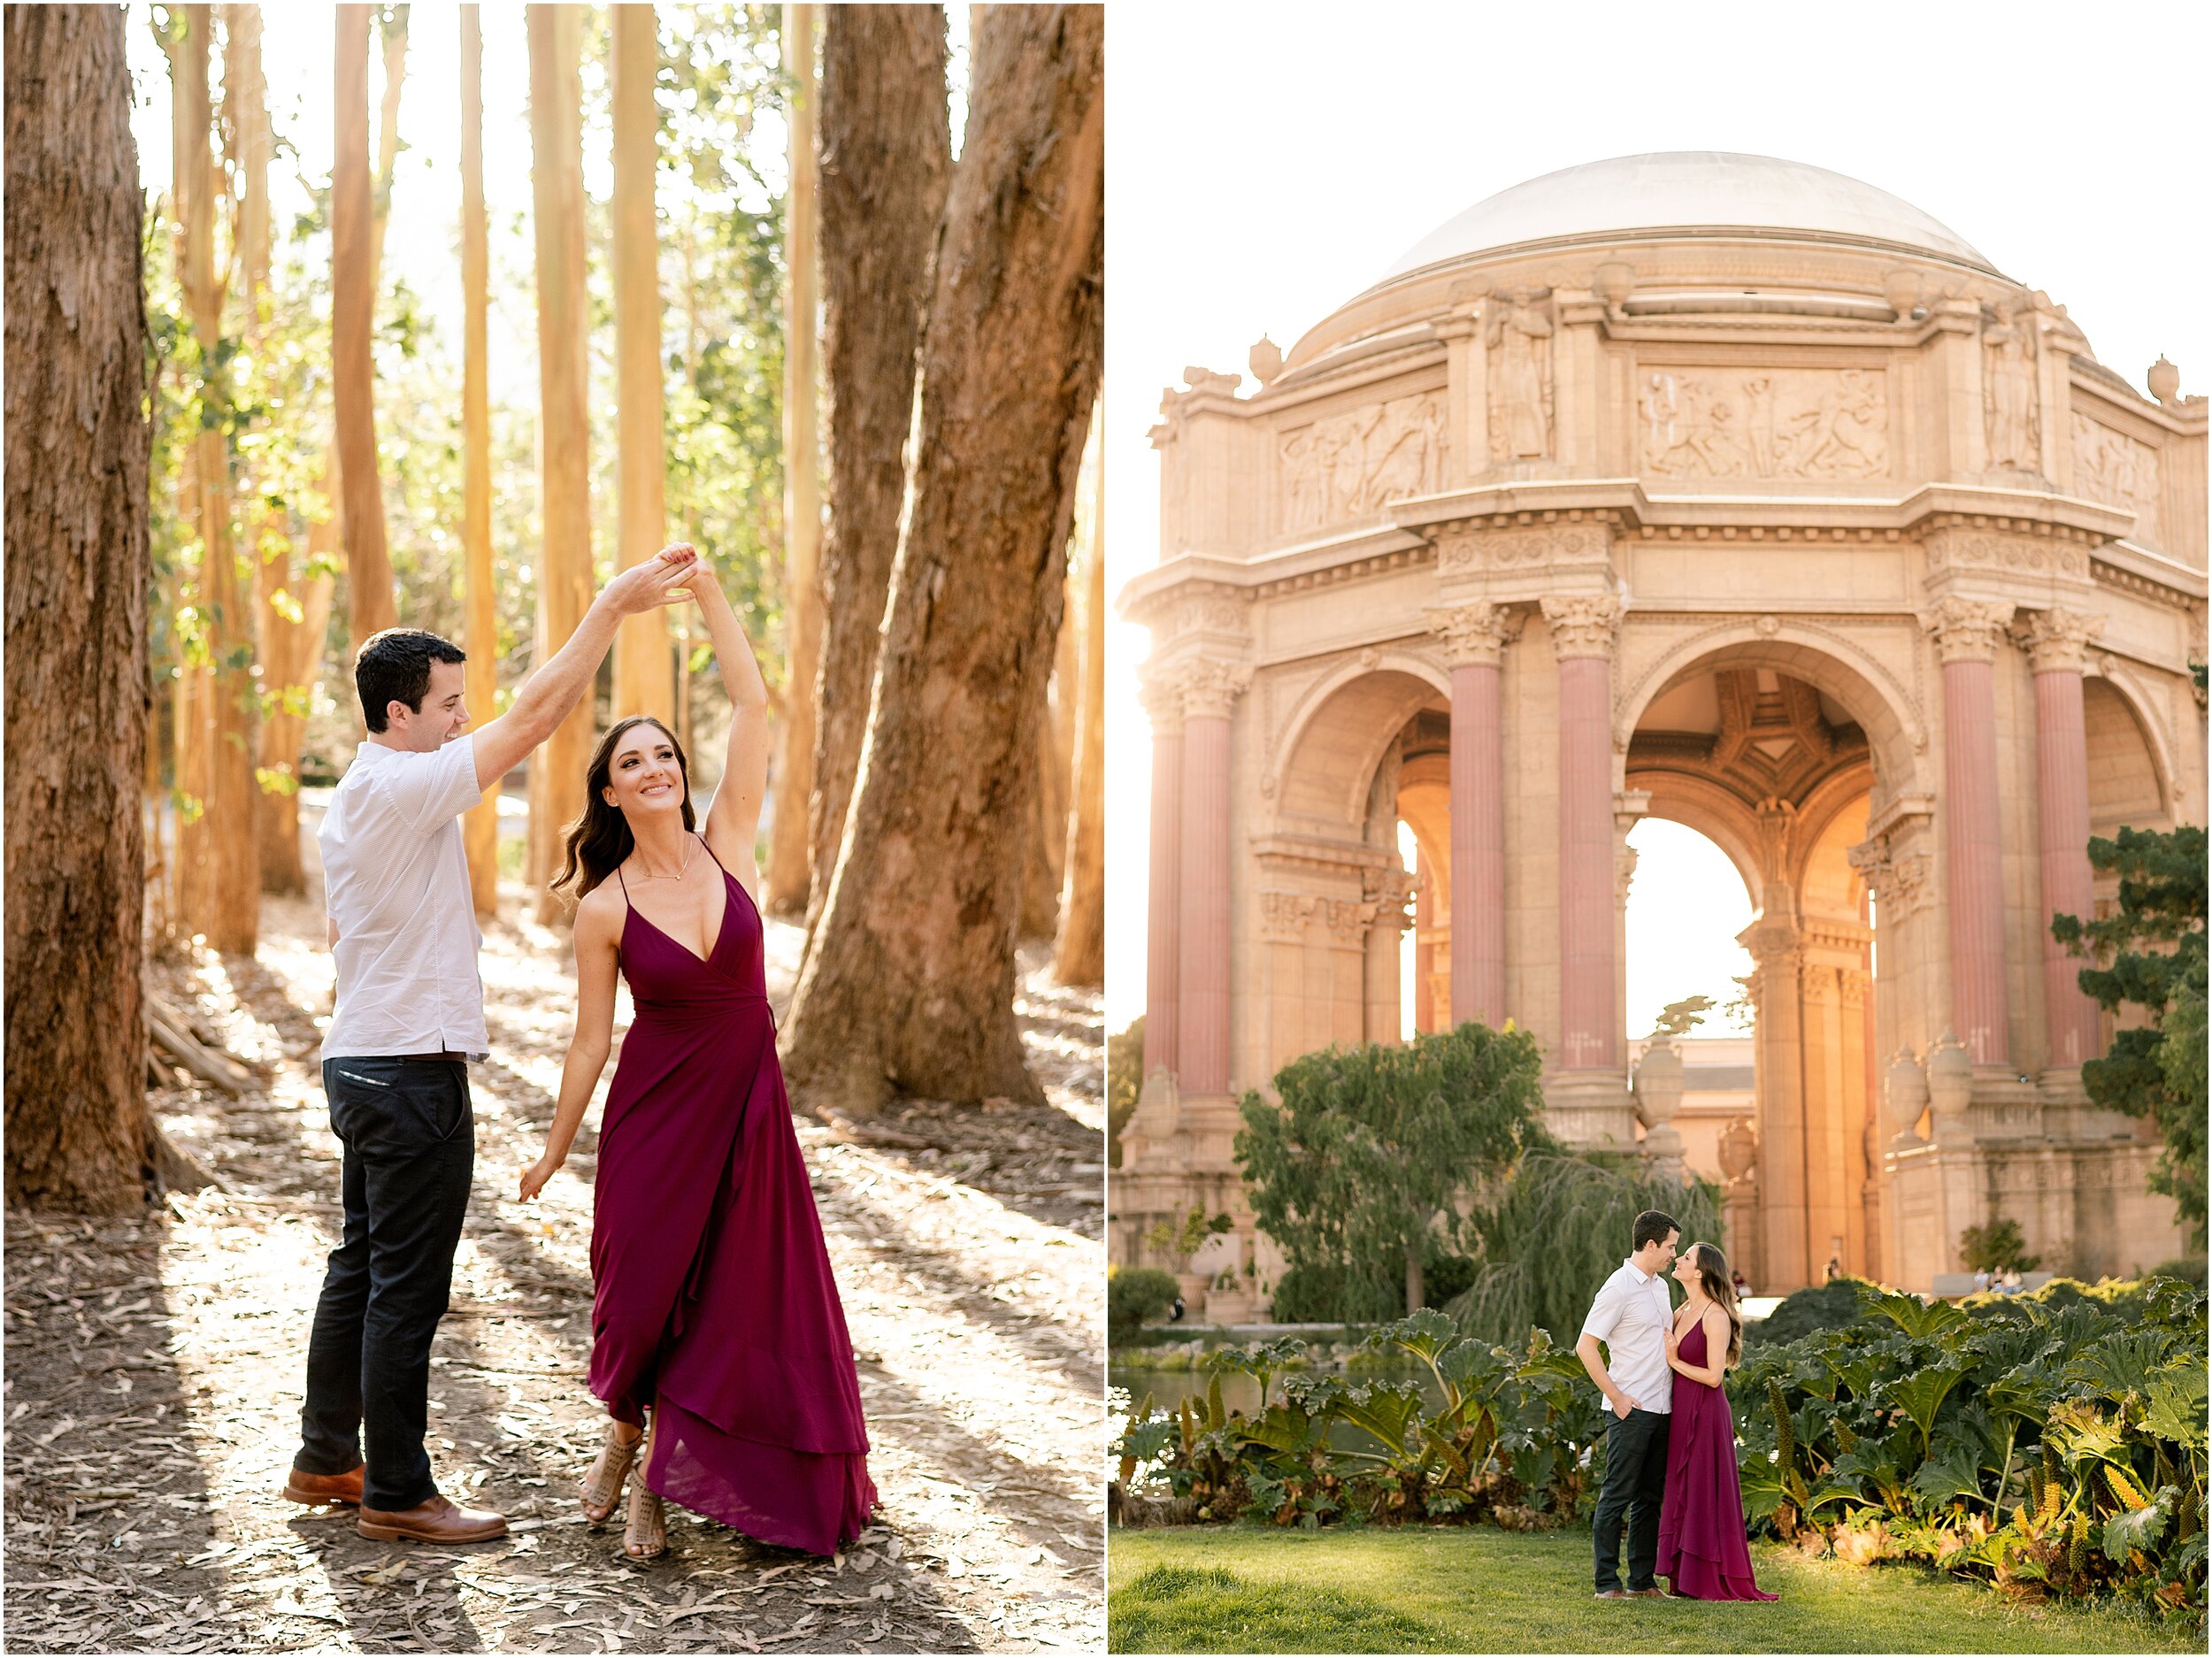 hannah leigh photography Baker Beach, Lovers Lane. Palace of Fine Arts Engagement Session San Franscico, CA_4820.jpg